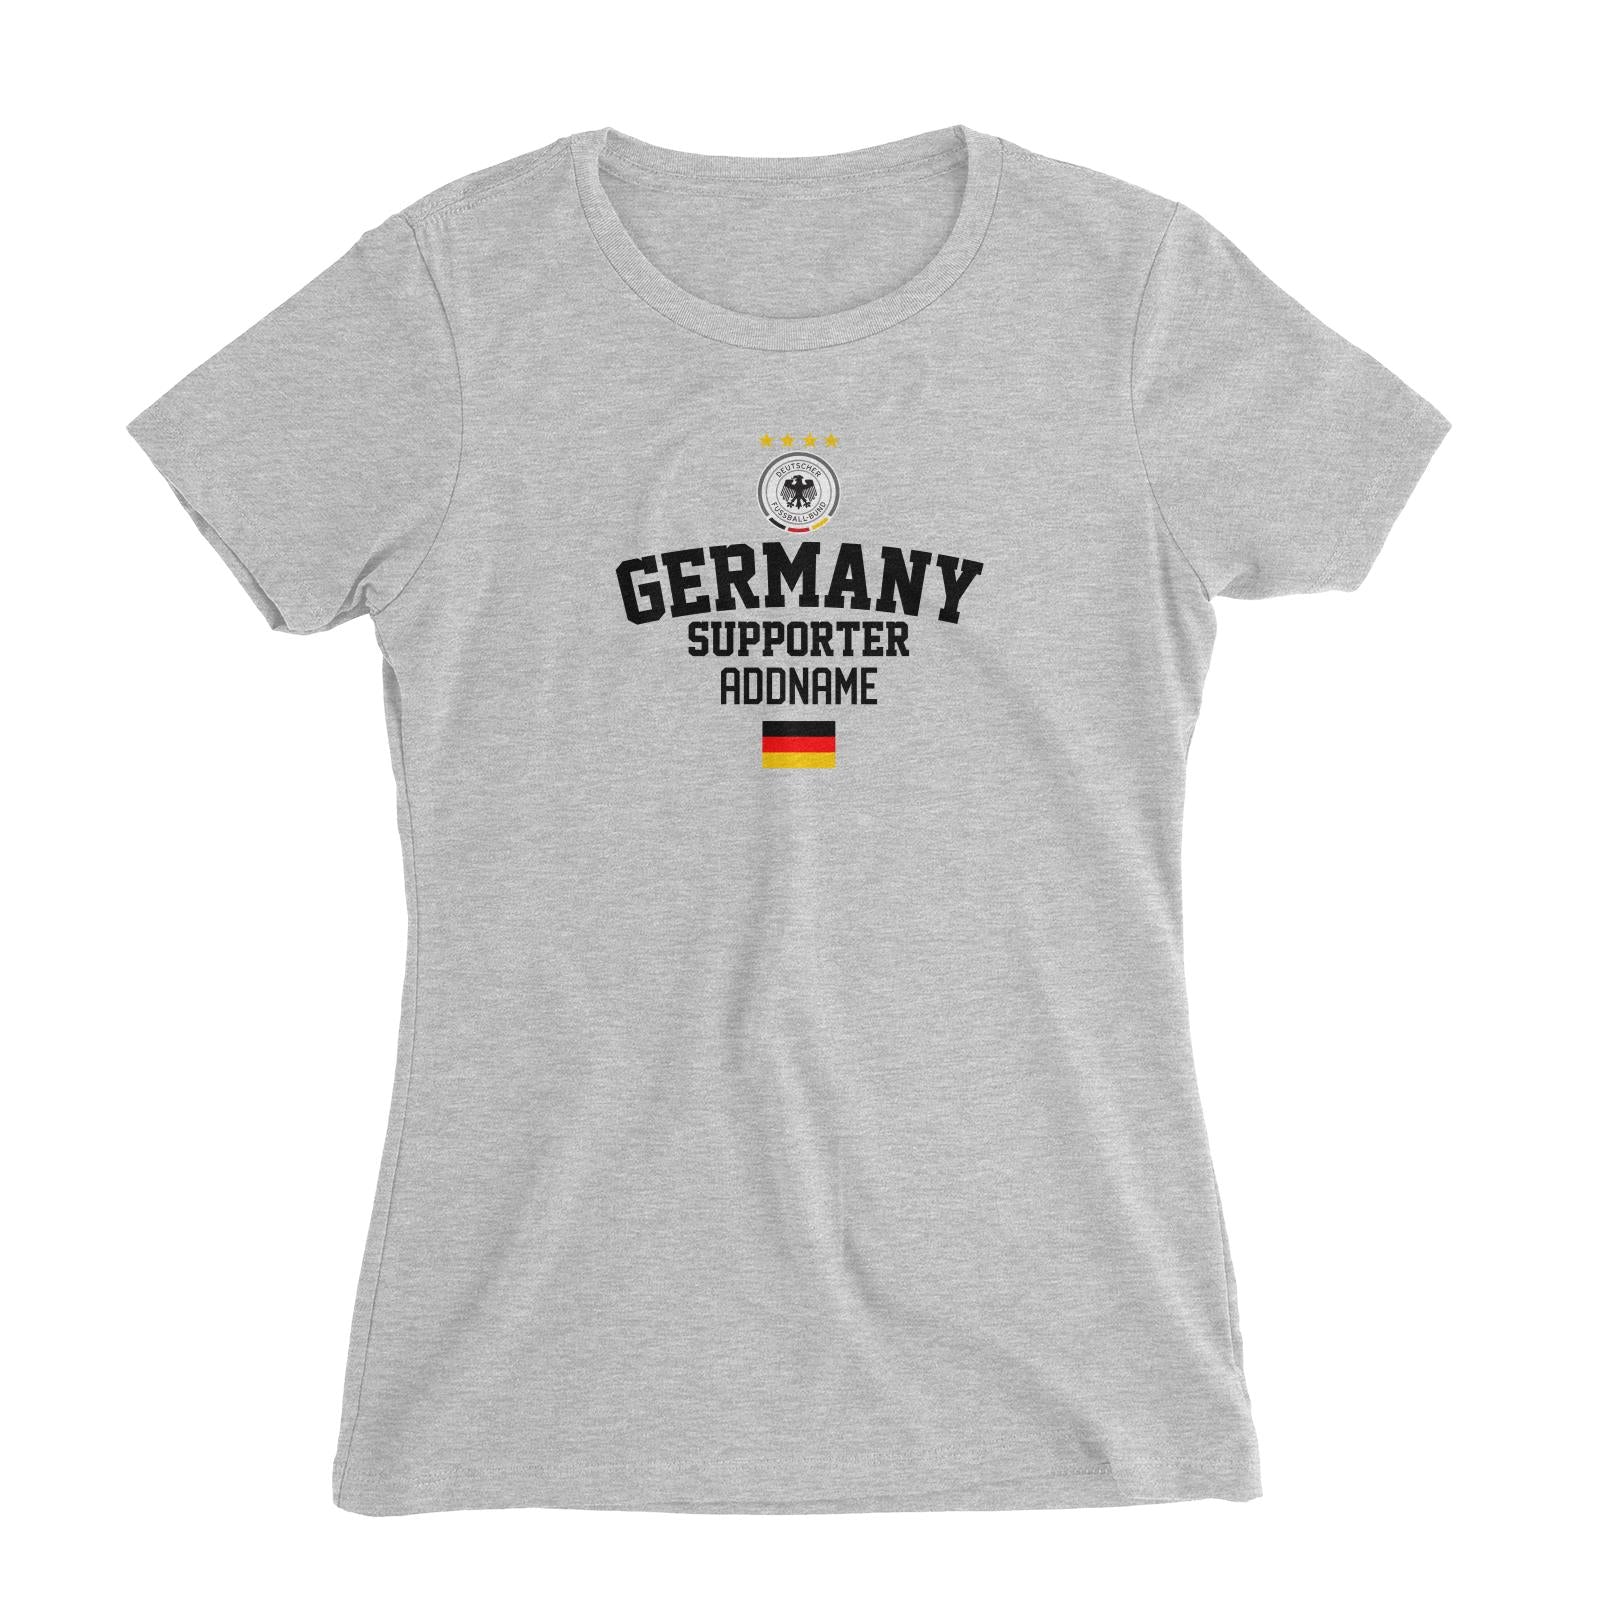 Germany Supporter World Cup Addname Women's Slim Fit T-Shirt